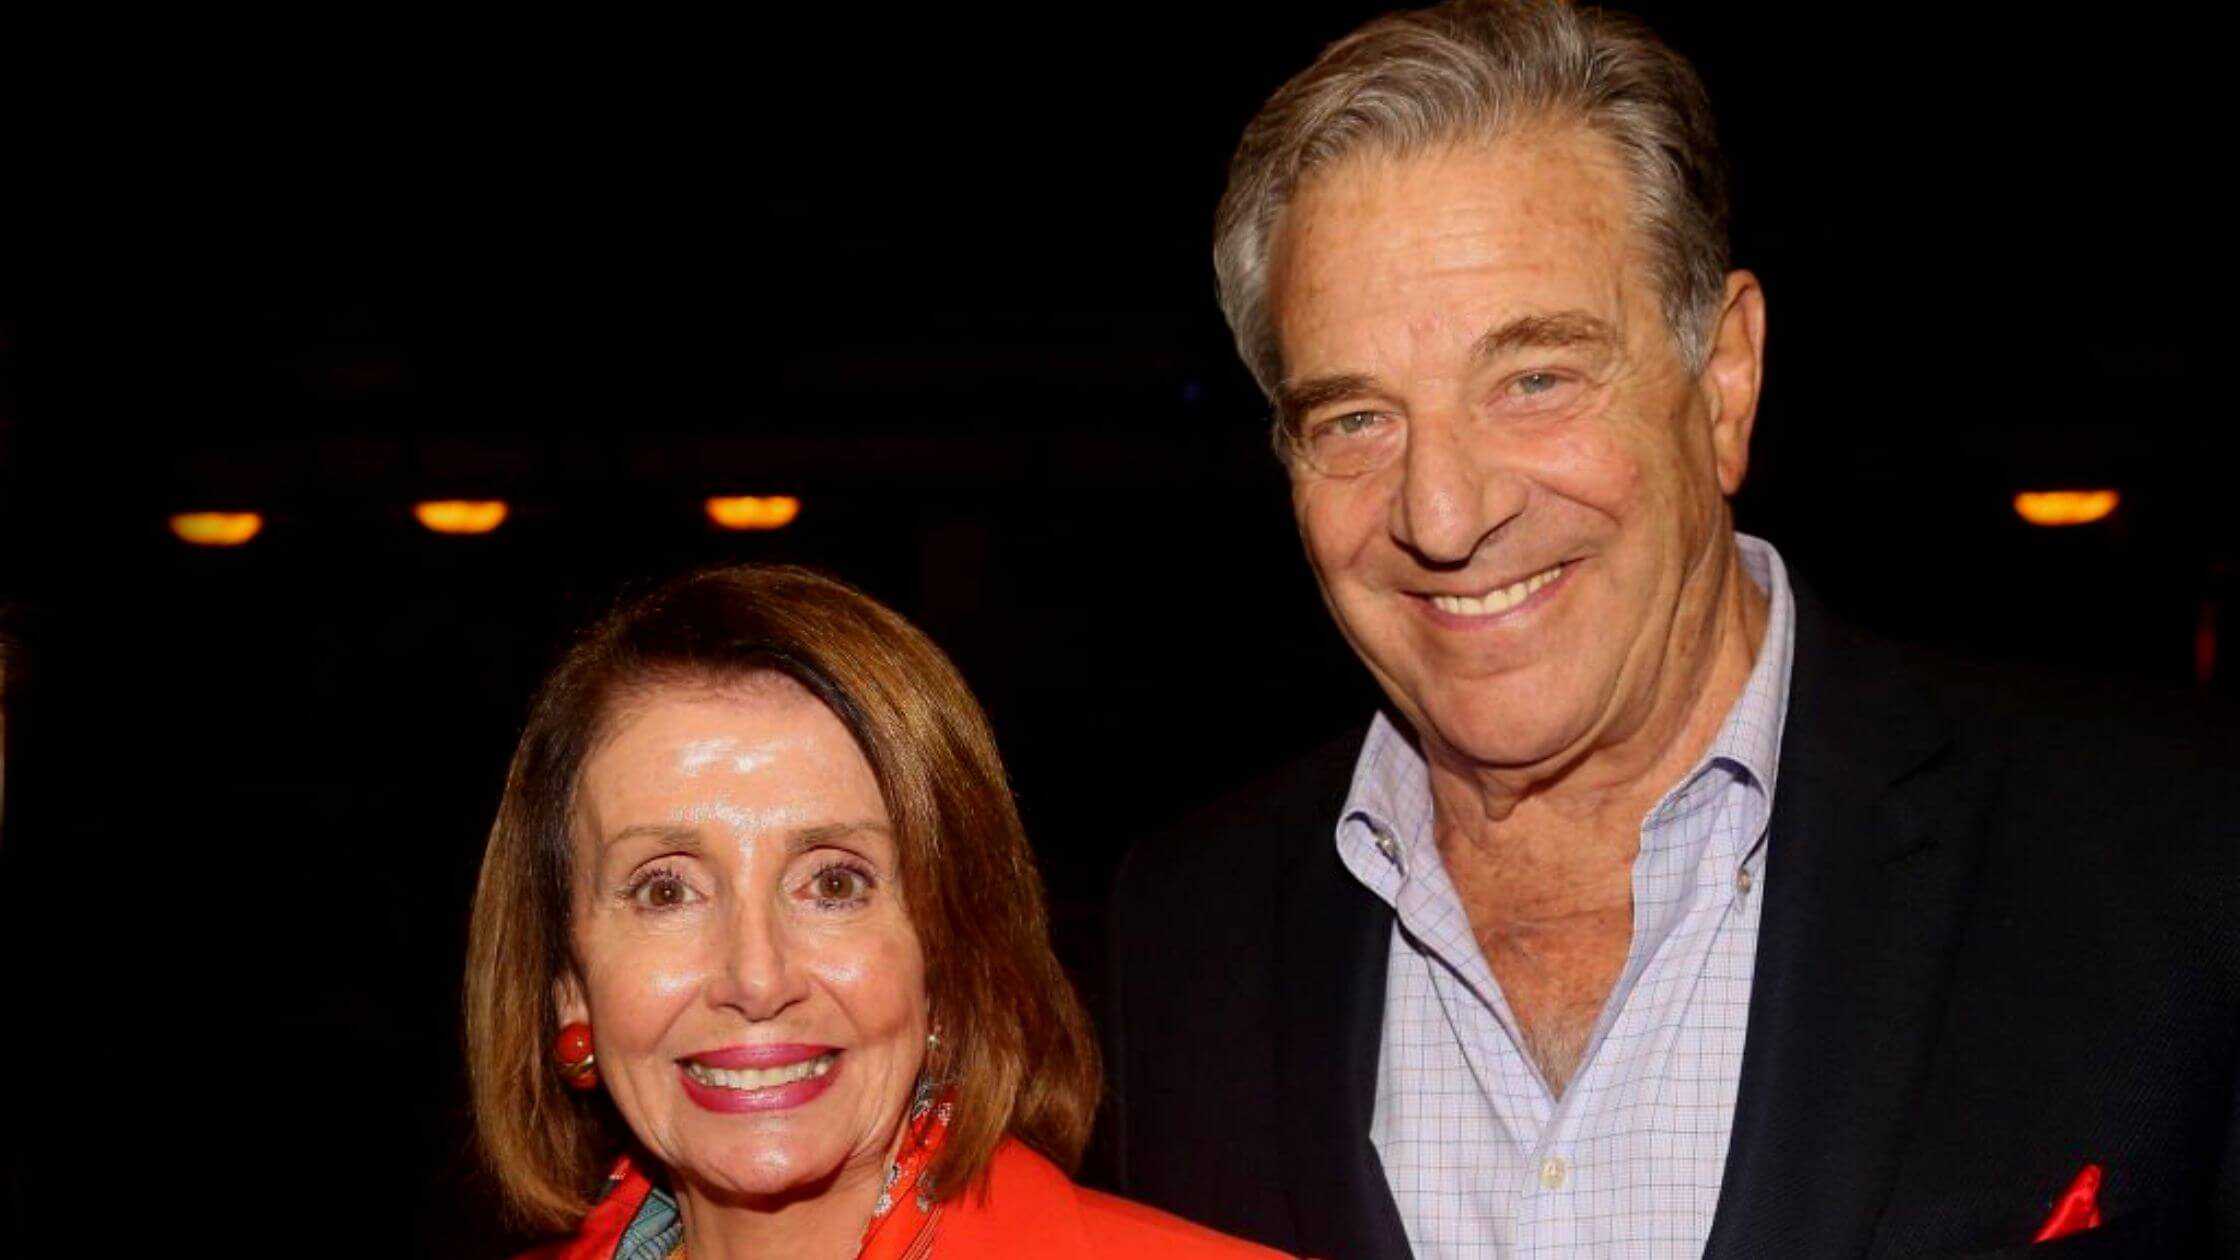 Latest Updates Of Paul Pelosi After The Hammer Attack Injuries